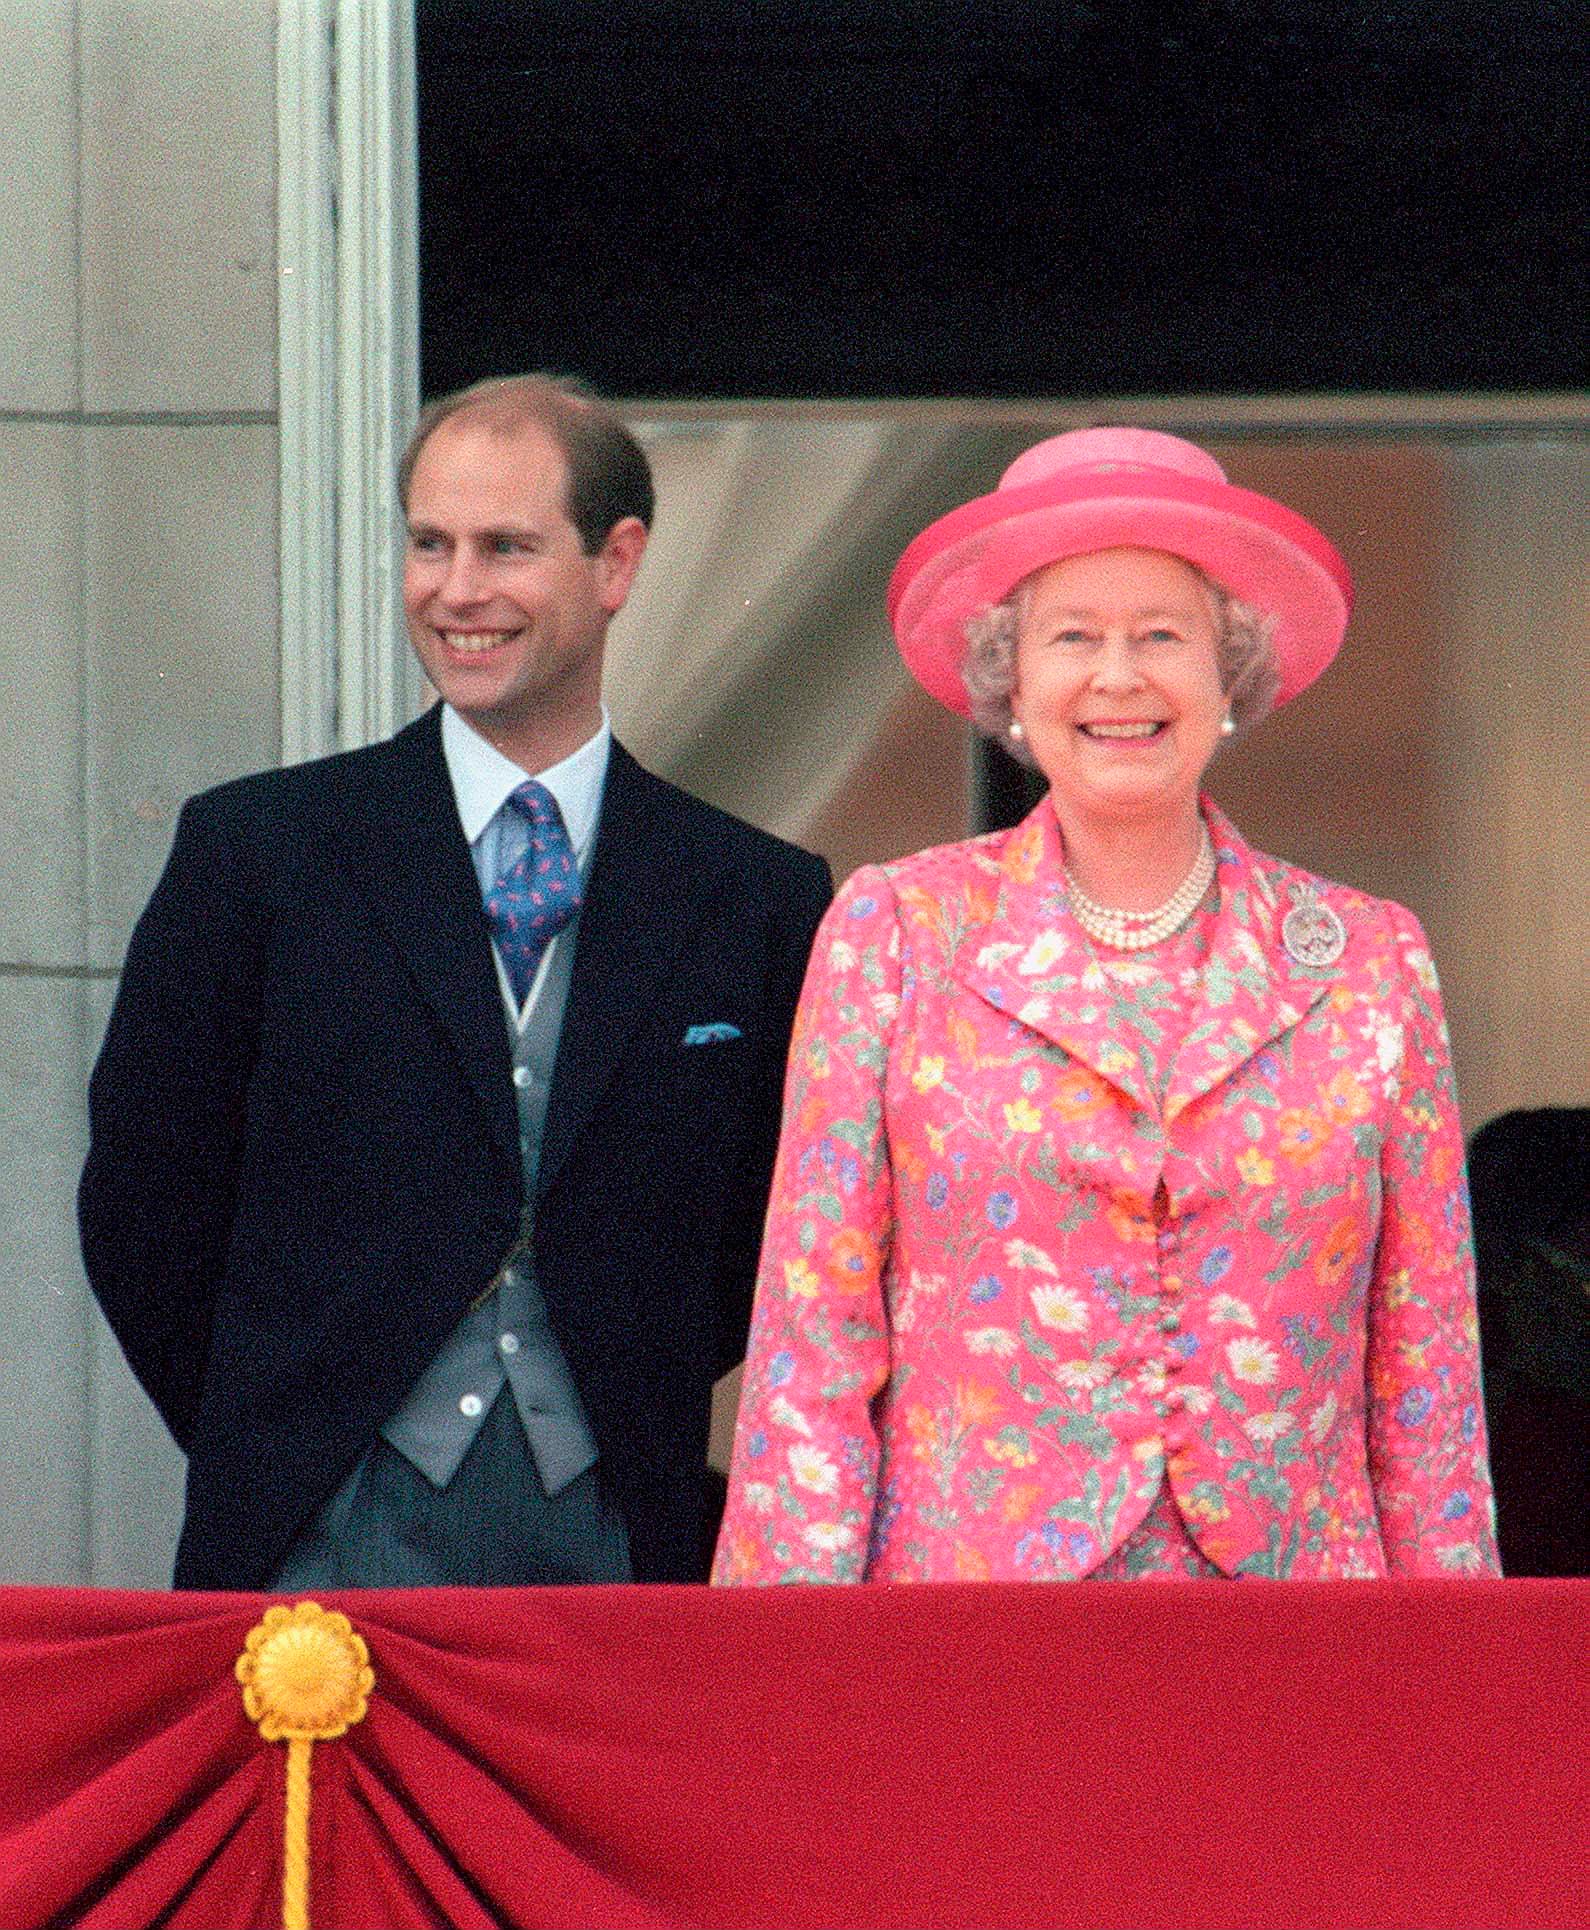 Prince Edward with his mother Queen Elizabeth II smiling from the balcony of Buckingham Palace after watching Trooping the Colour